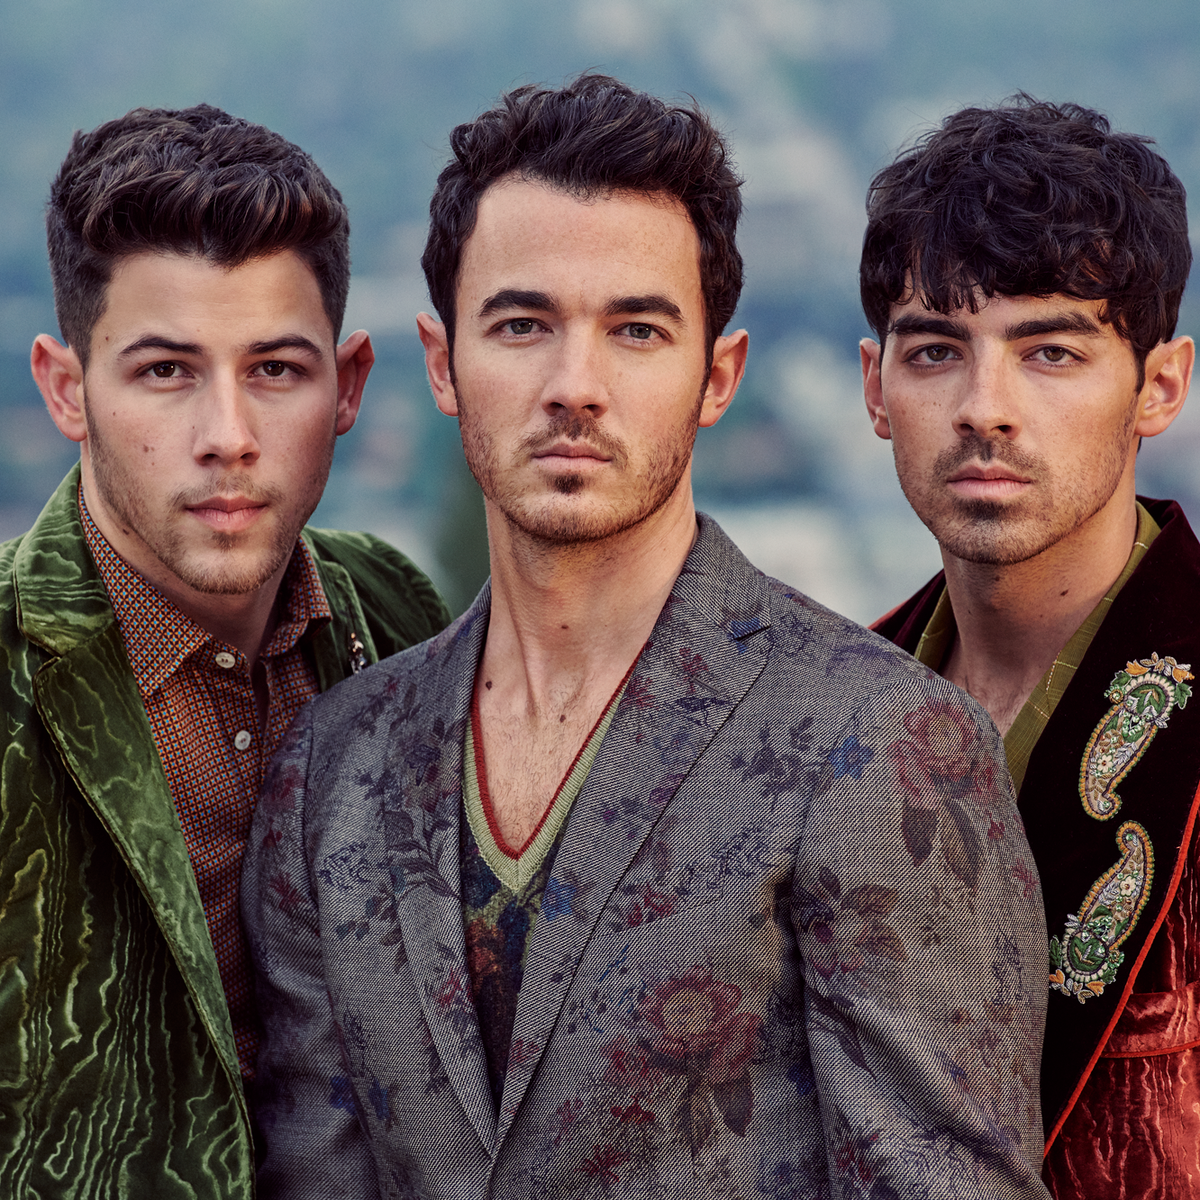 The Jonas Brothers: From Teen Pop Stars to Global Superstars